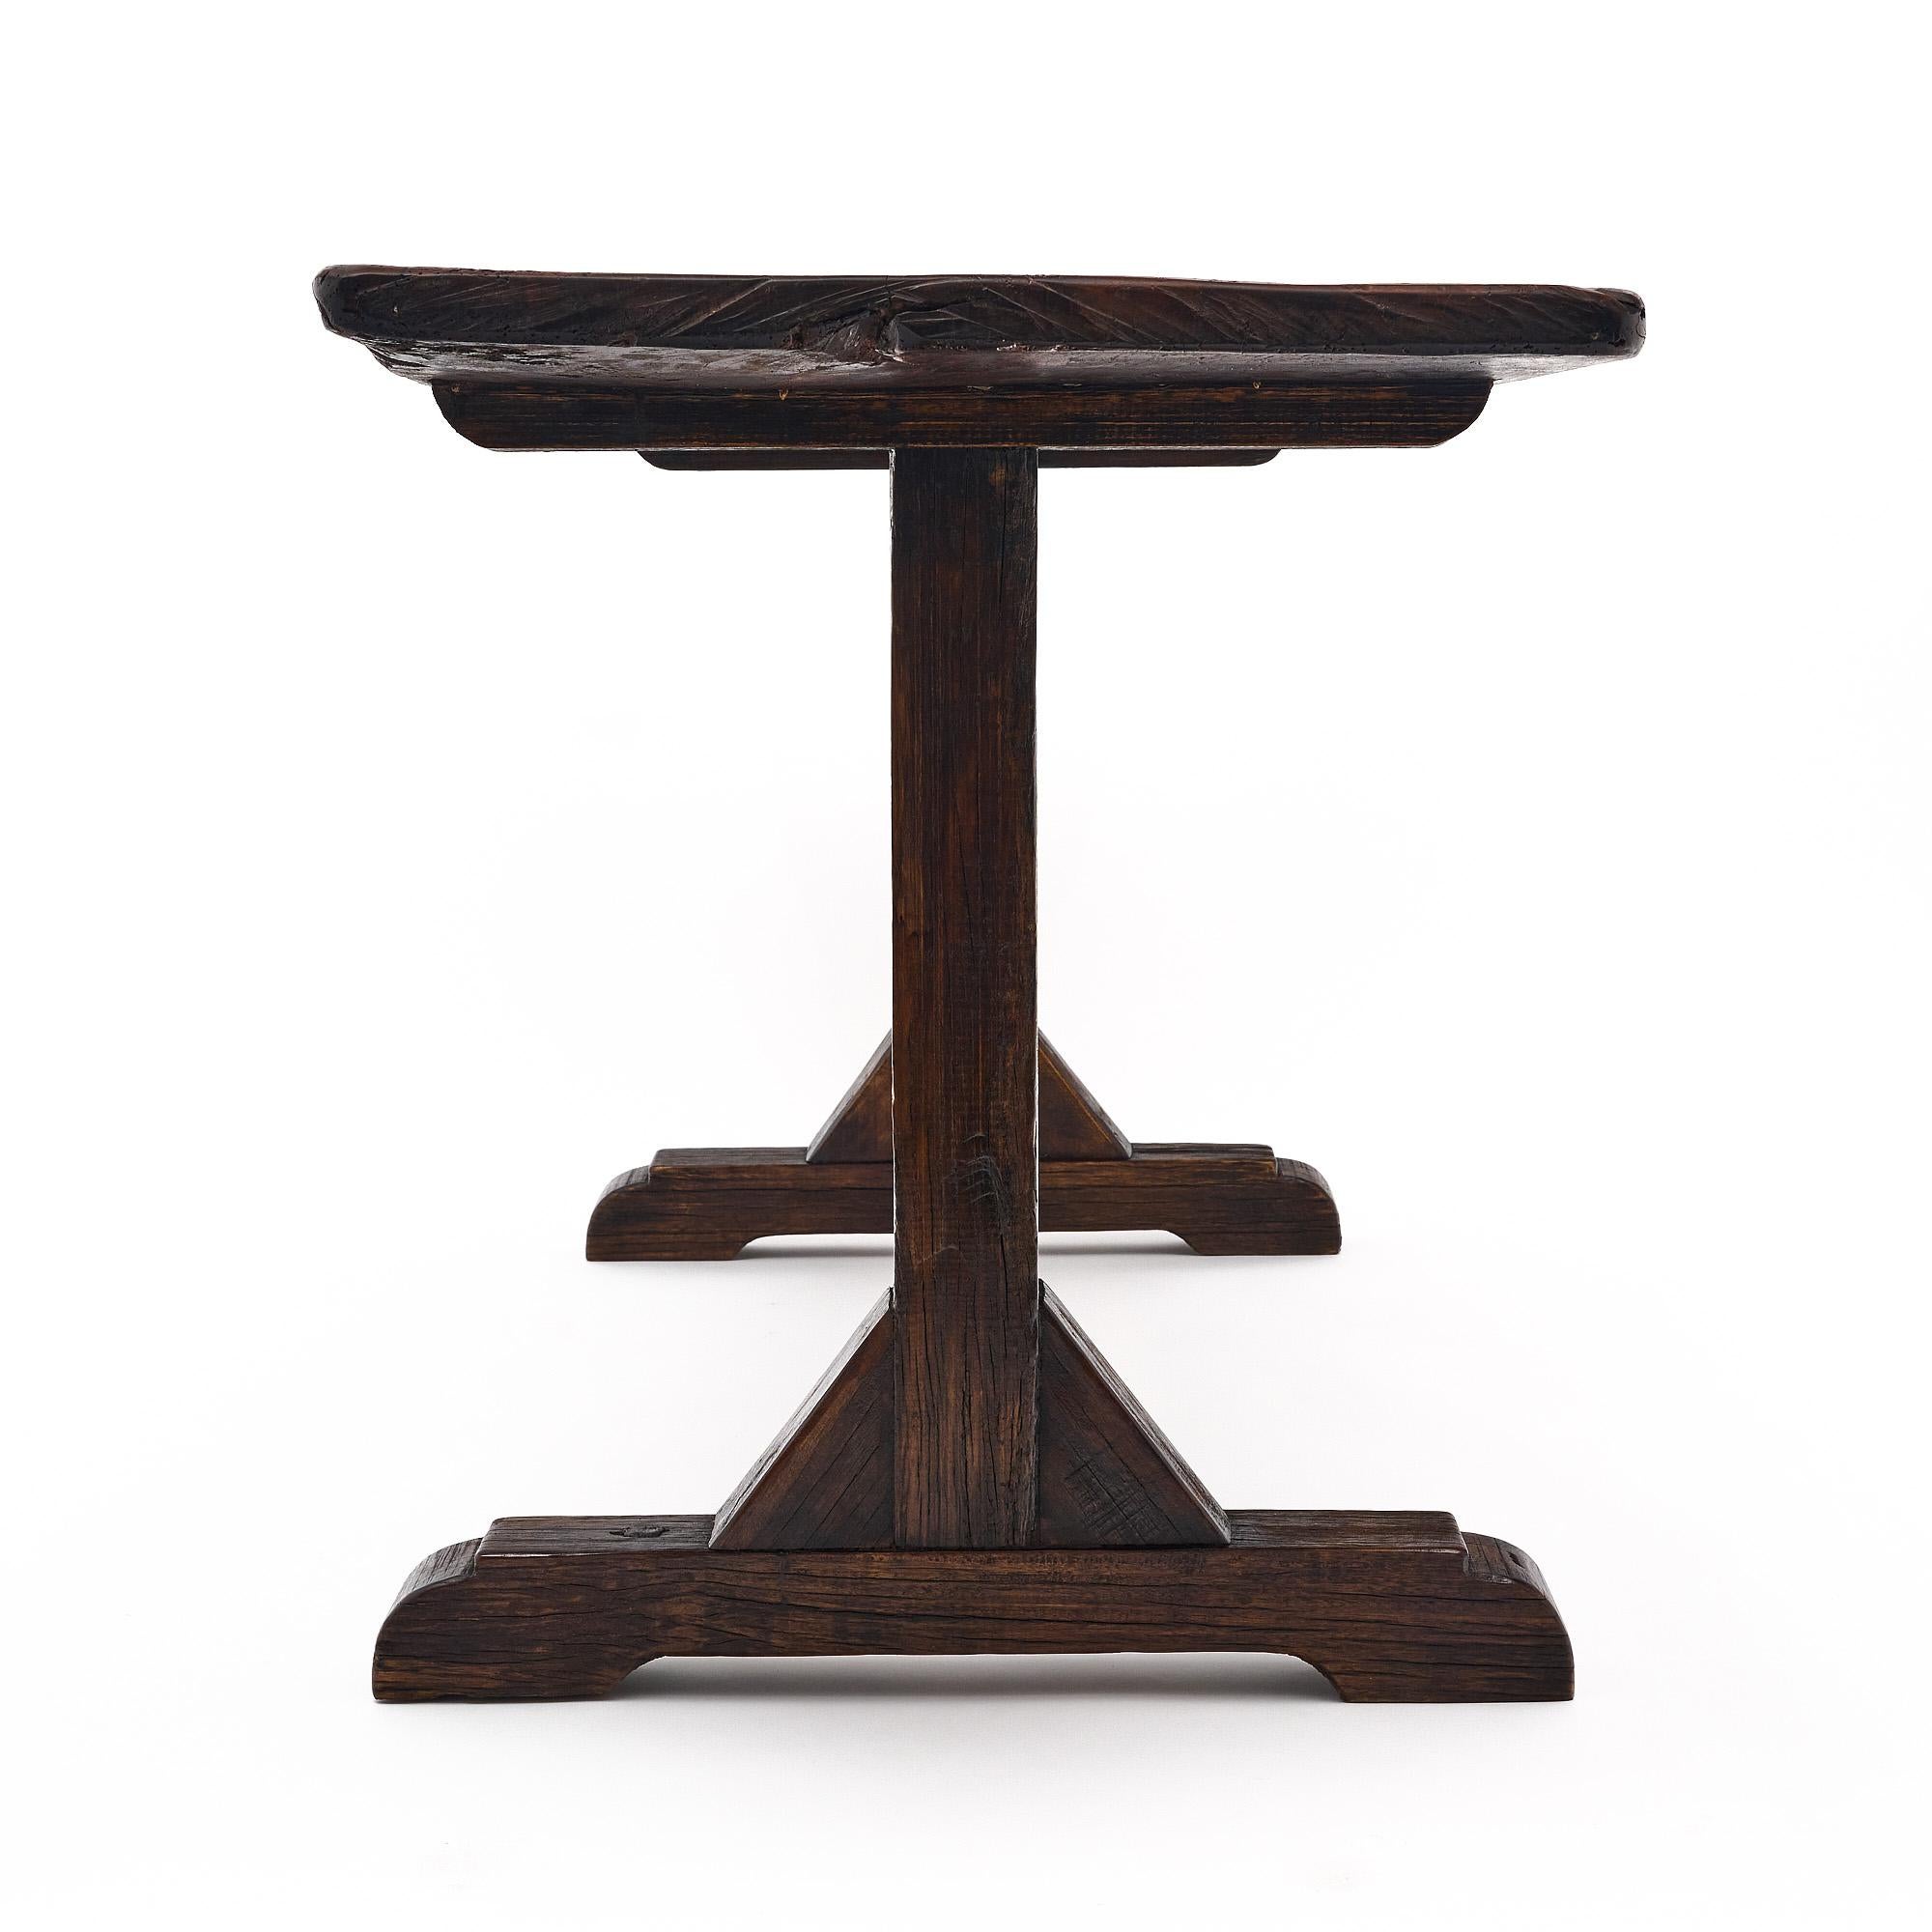 Farm table, from Spain, made of patinated chestnut. The Antique console features a single 18th-Century plank top on a reconstructed antique base of reclaimed beam.
